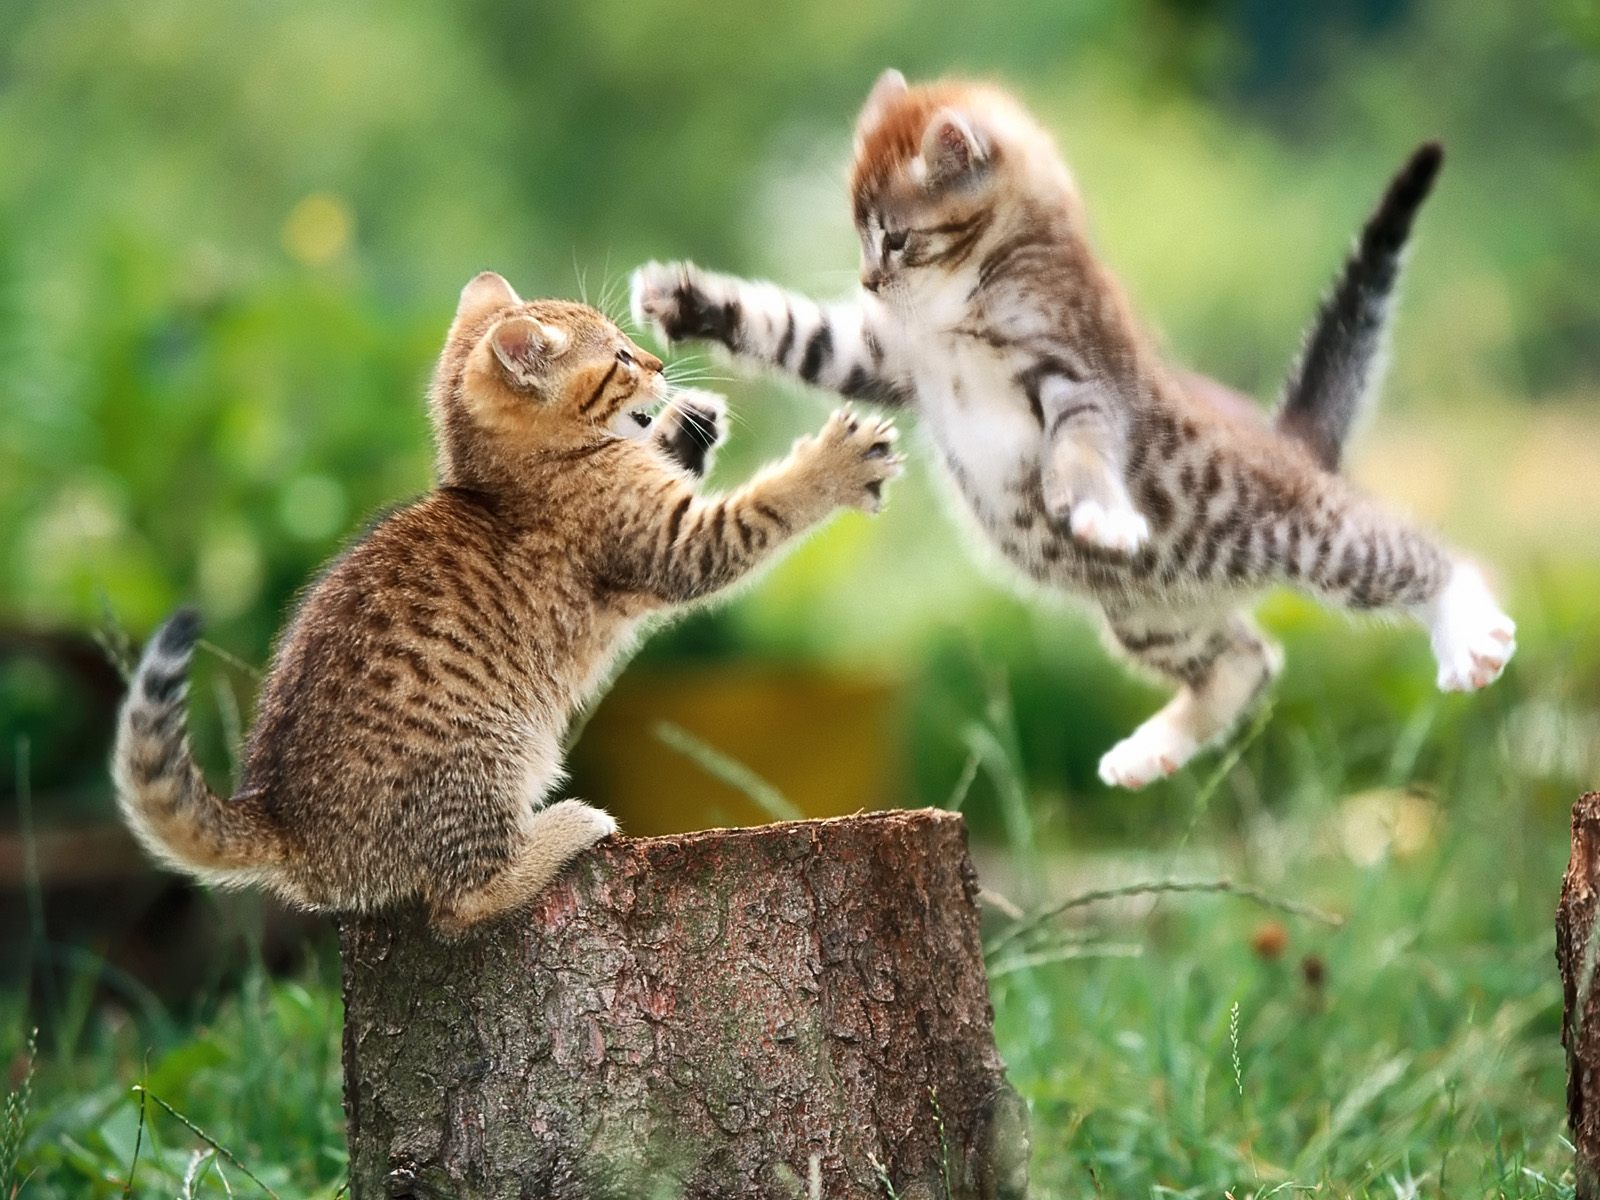 Two Cats Fighting: Playful kitten engaging in a friendly tussle with another cat